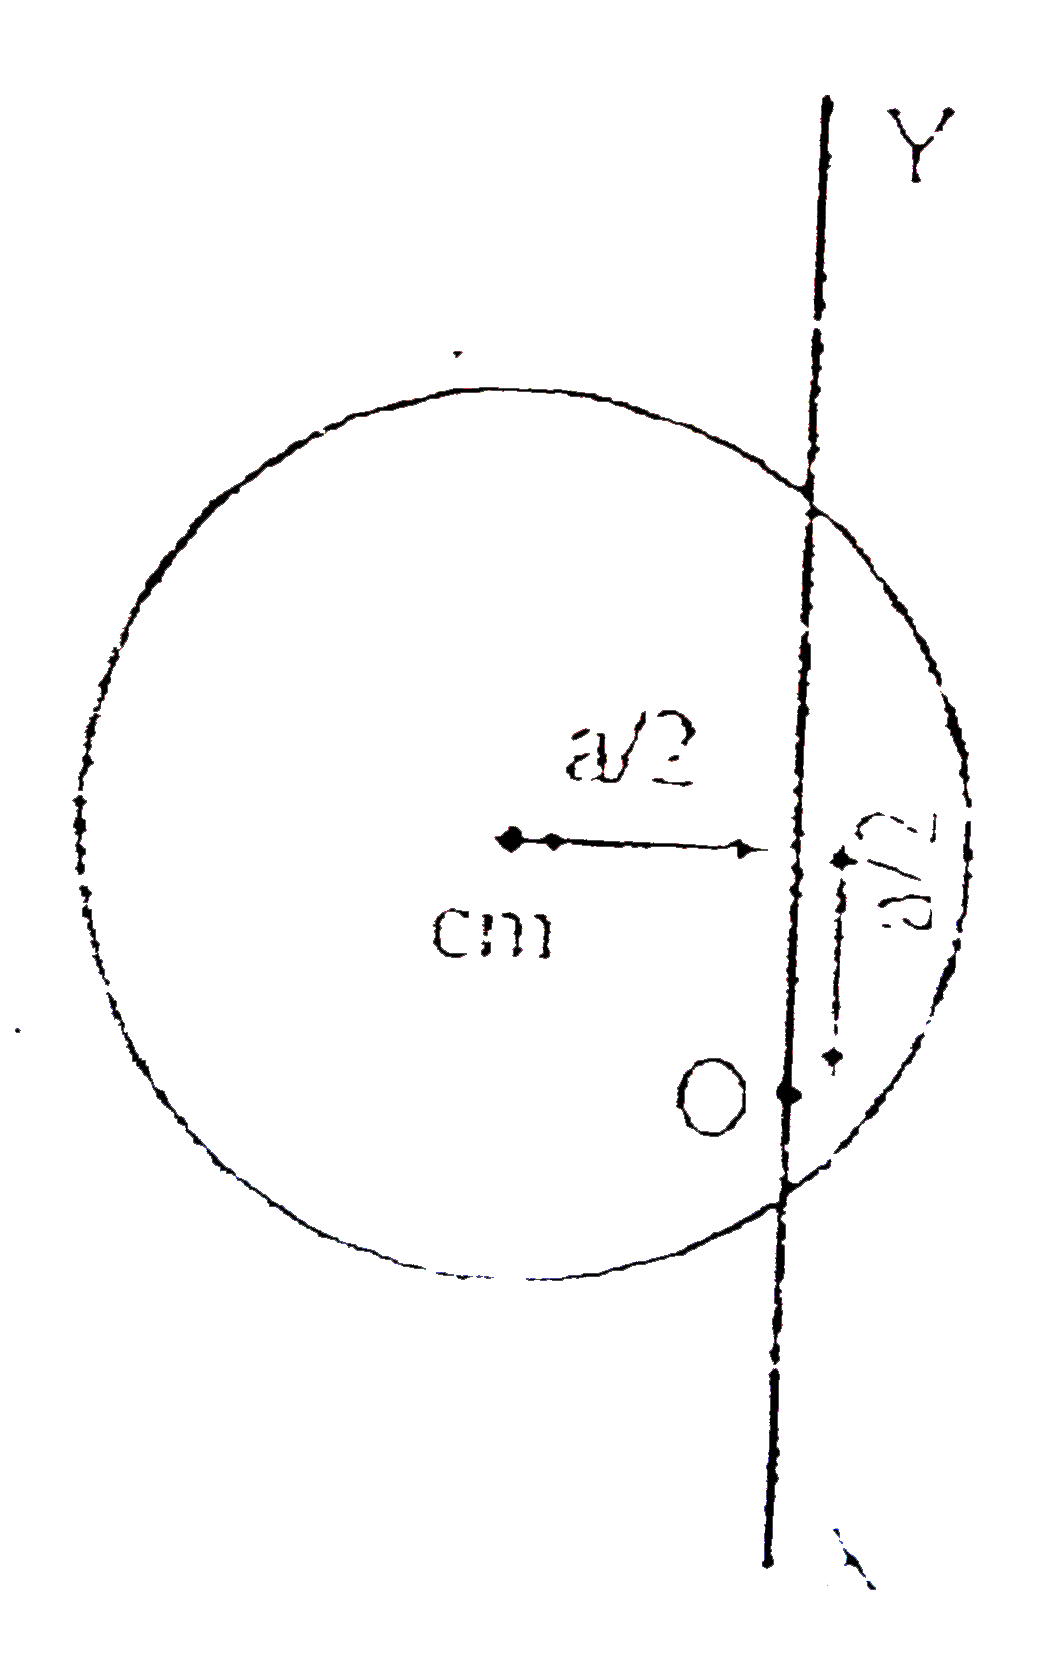 The diagram shows a uniform disc of mass M & radius 'a', if the moment of inertia of the disc about the axis XY is I, its moment of inertia about an axis through O and perpendicular to the plane of the disc is